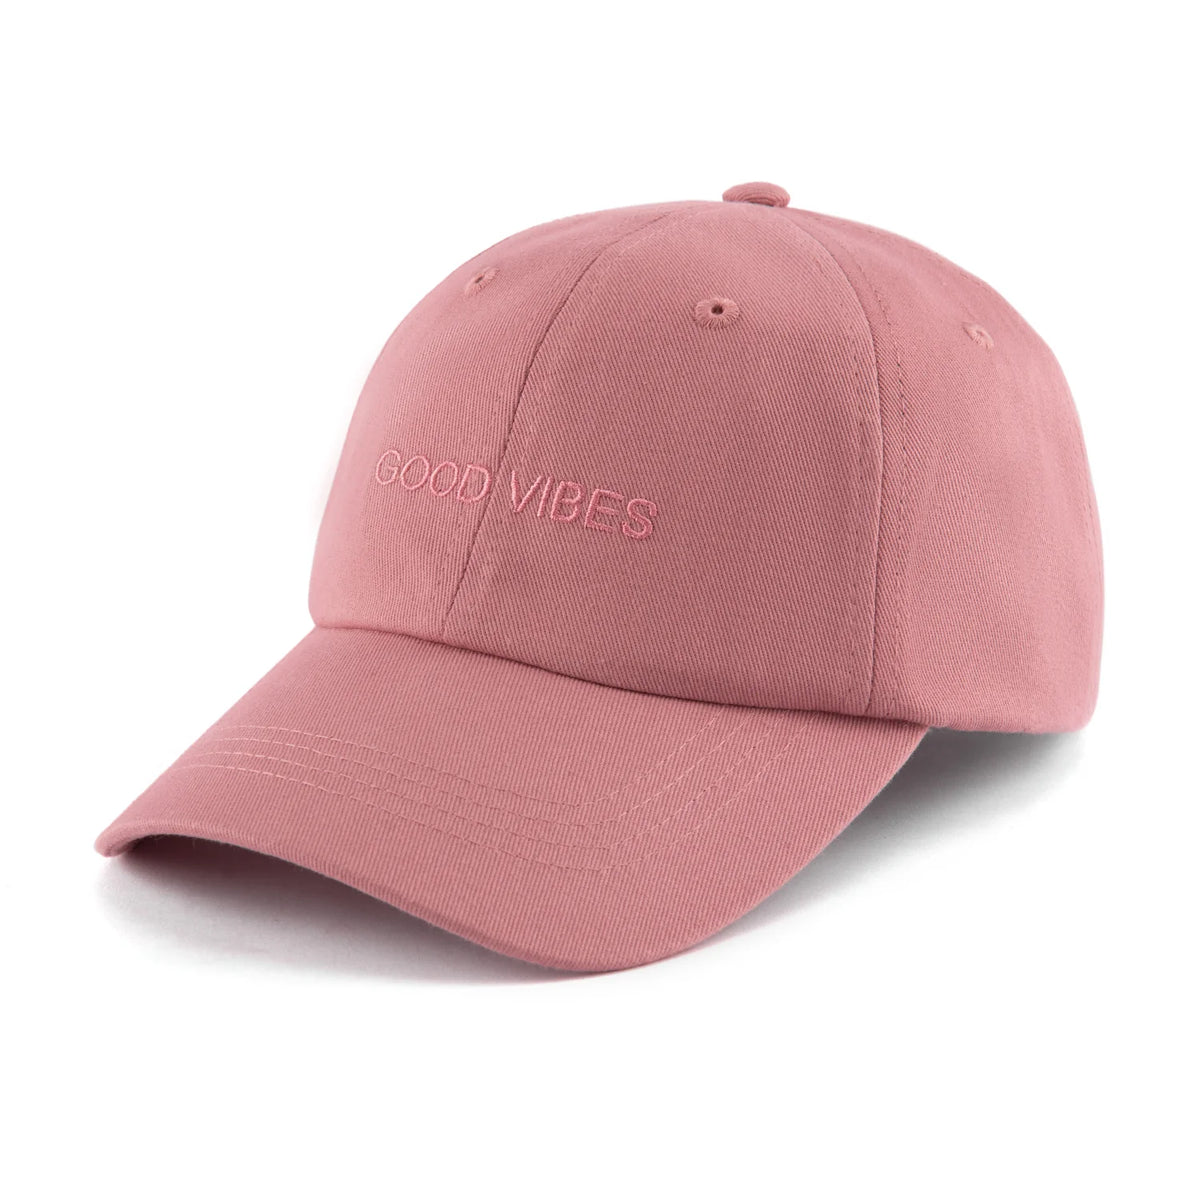 Cubs & Co - Dusty Rose Good Vibes Cap